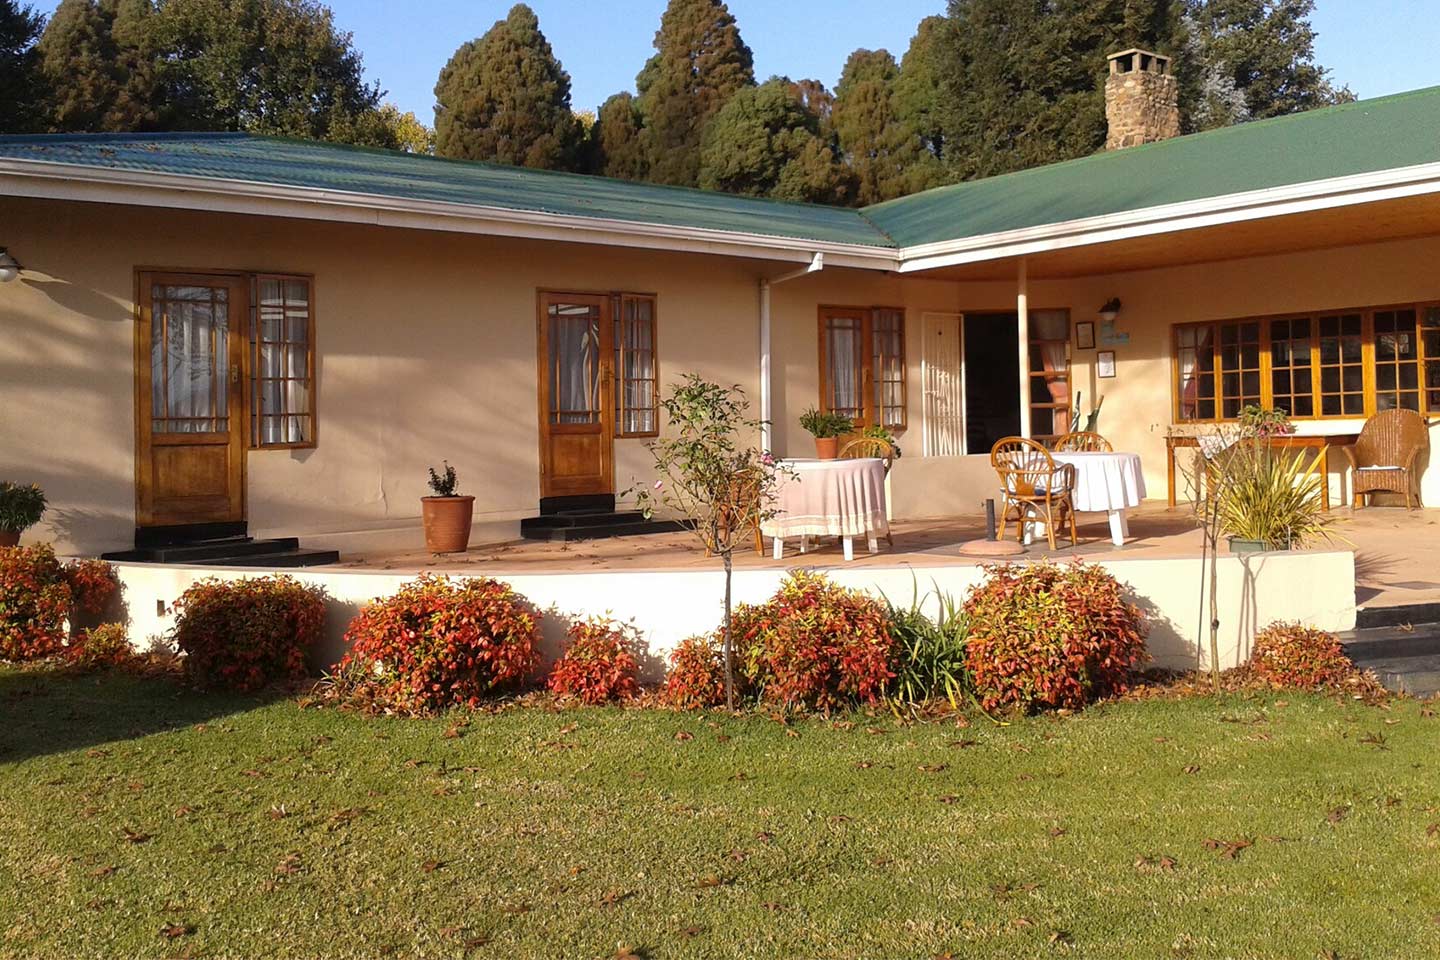 Sani Pass Manor Guest House - Himeville